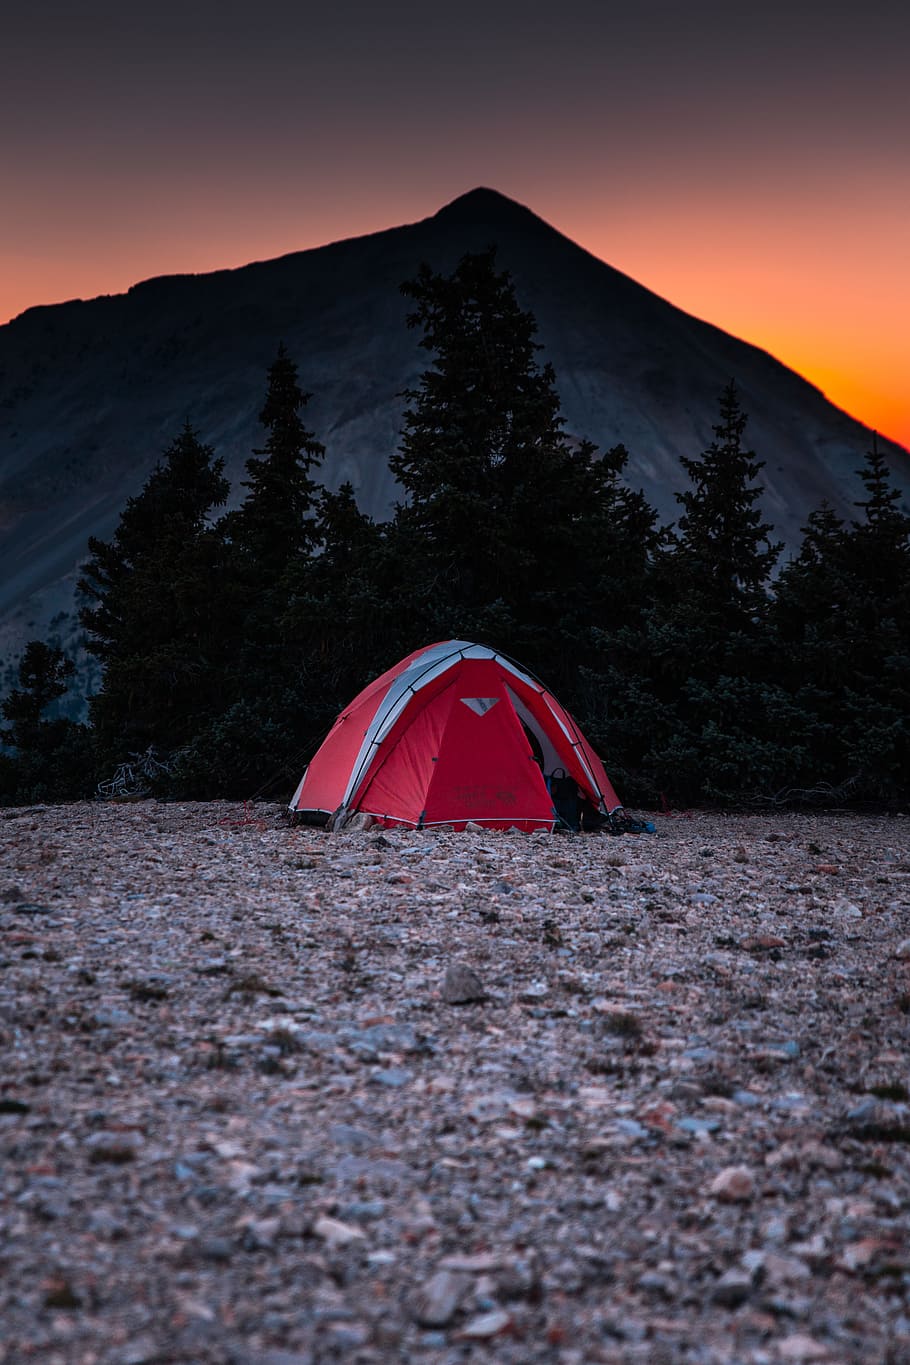 red and gray done tent near tree, forest, mountain hardwear, sunset